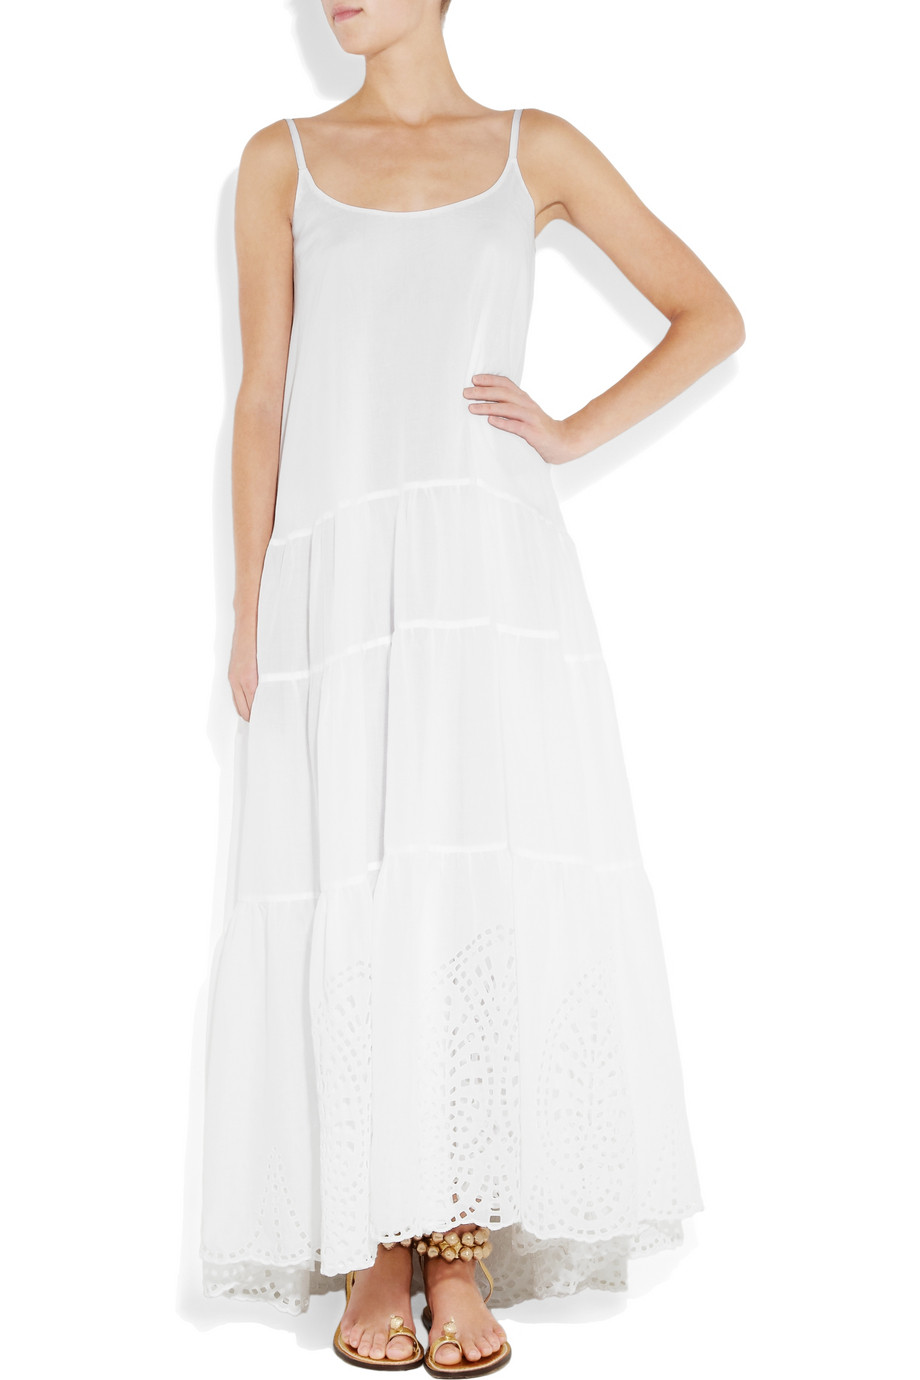 Lyst - Issa Eyelet-embroidered Cotton-voile Maxi Dress in White